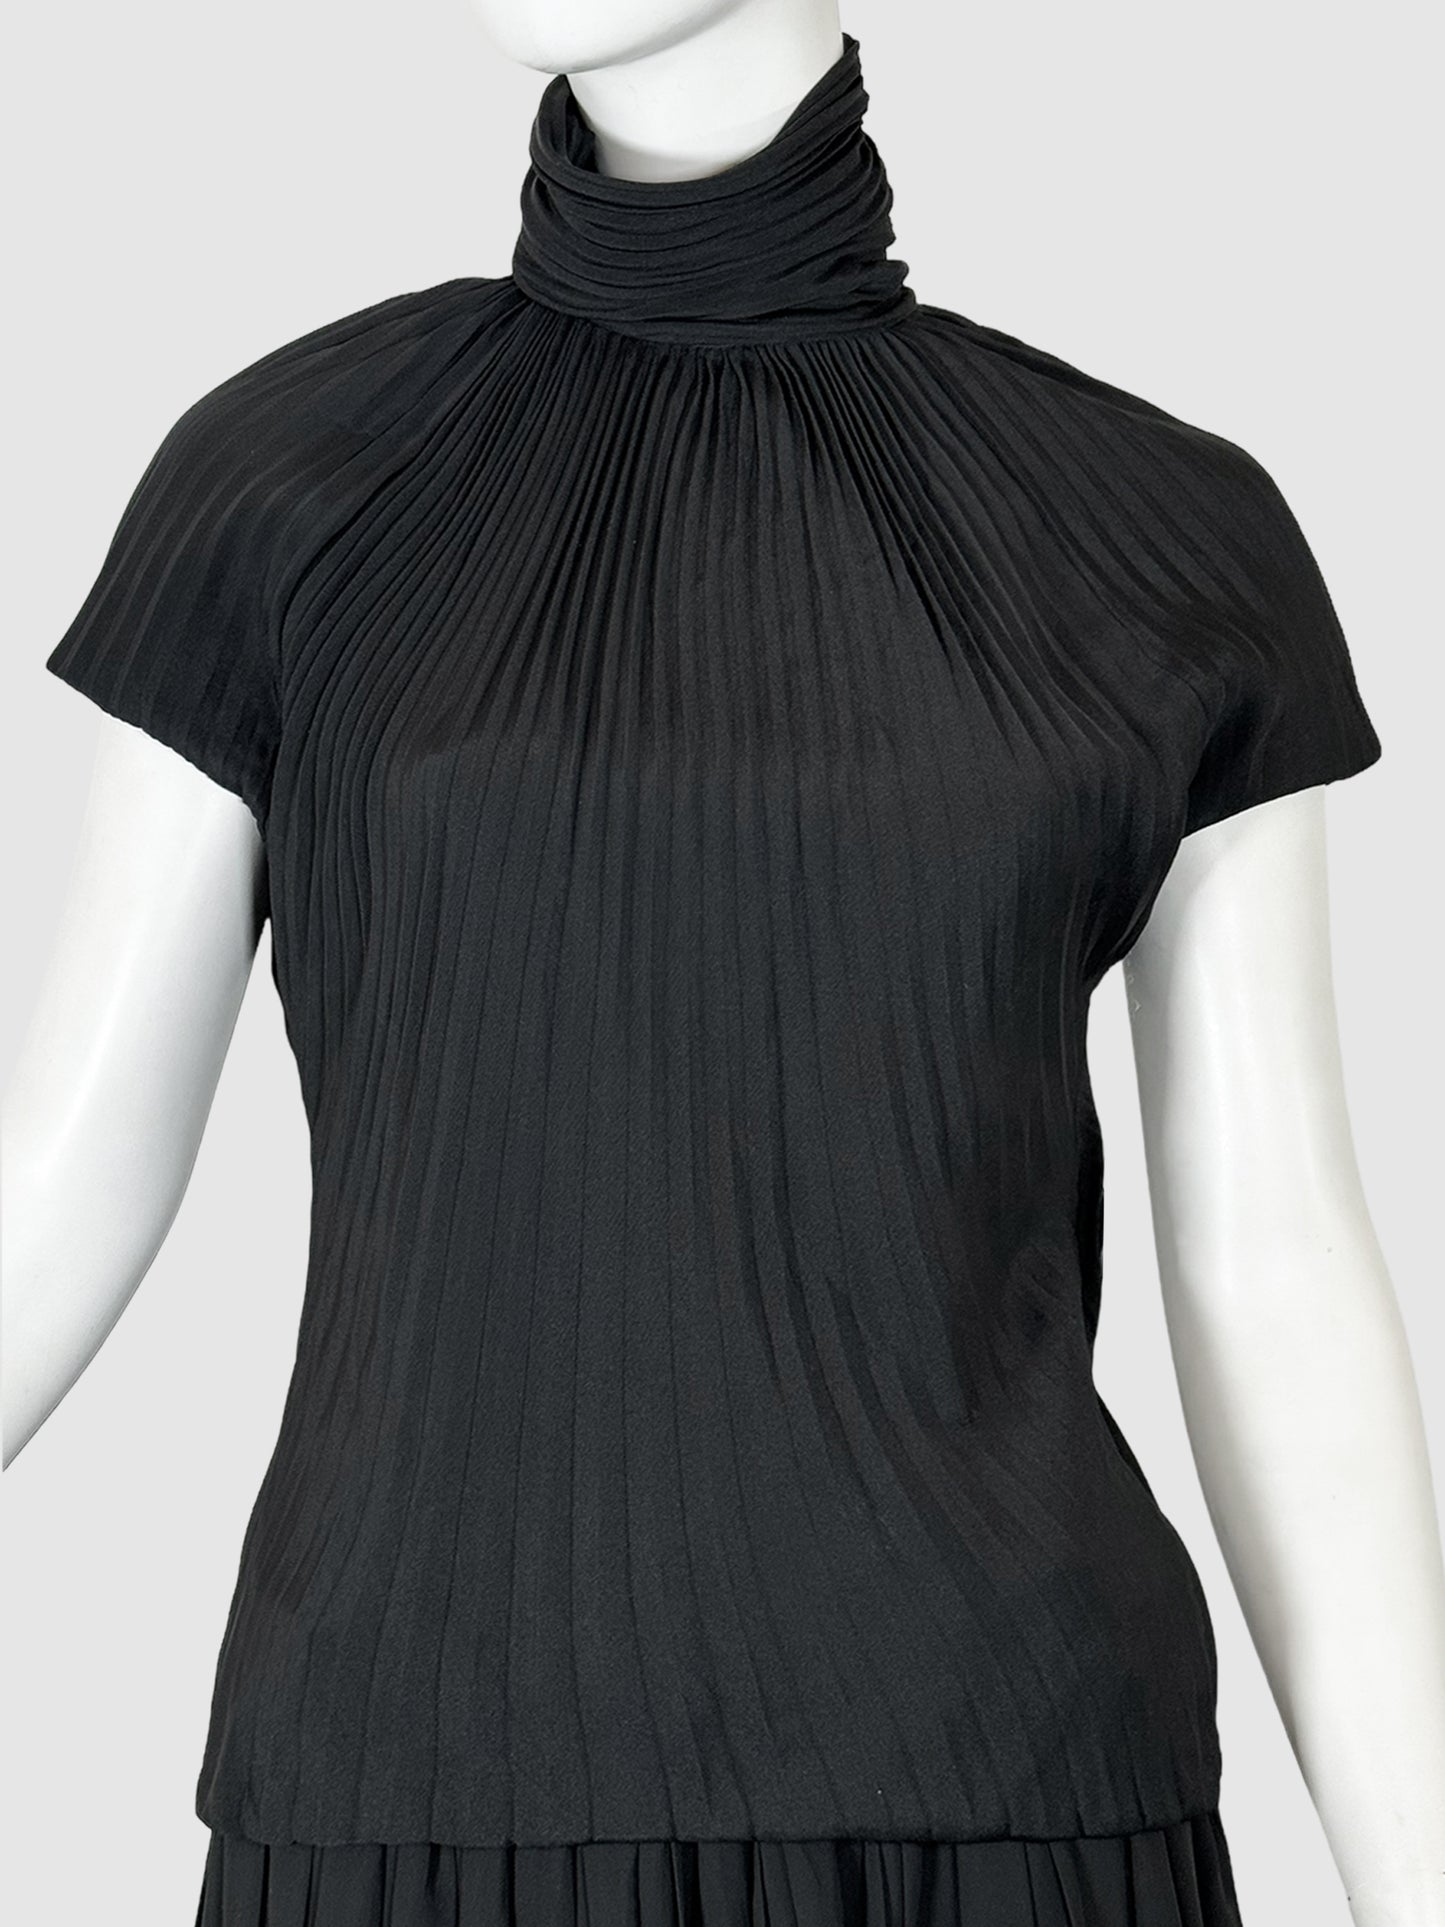 Pleated High Neck Top - Size XS/S